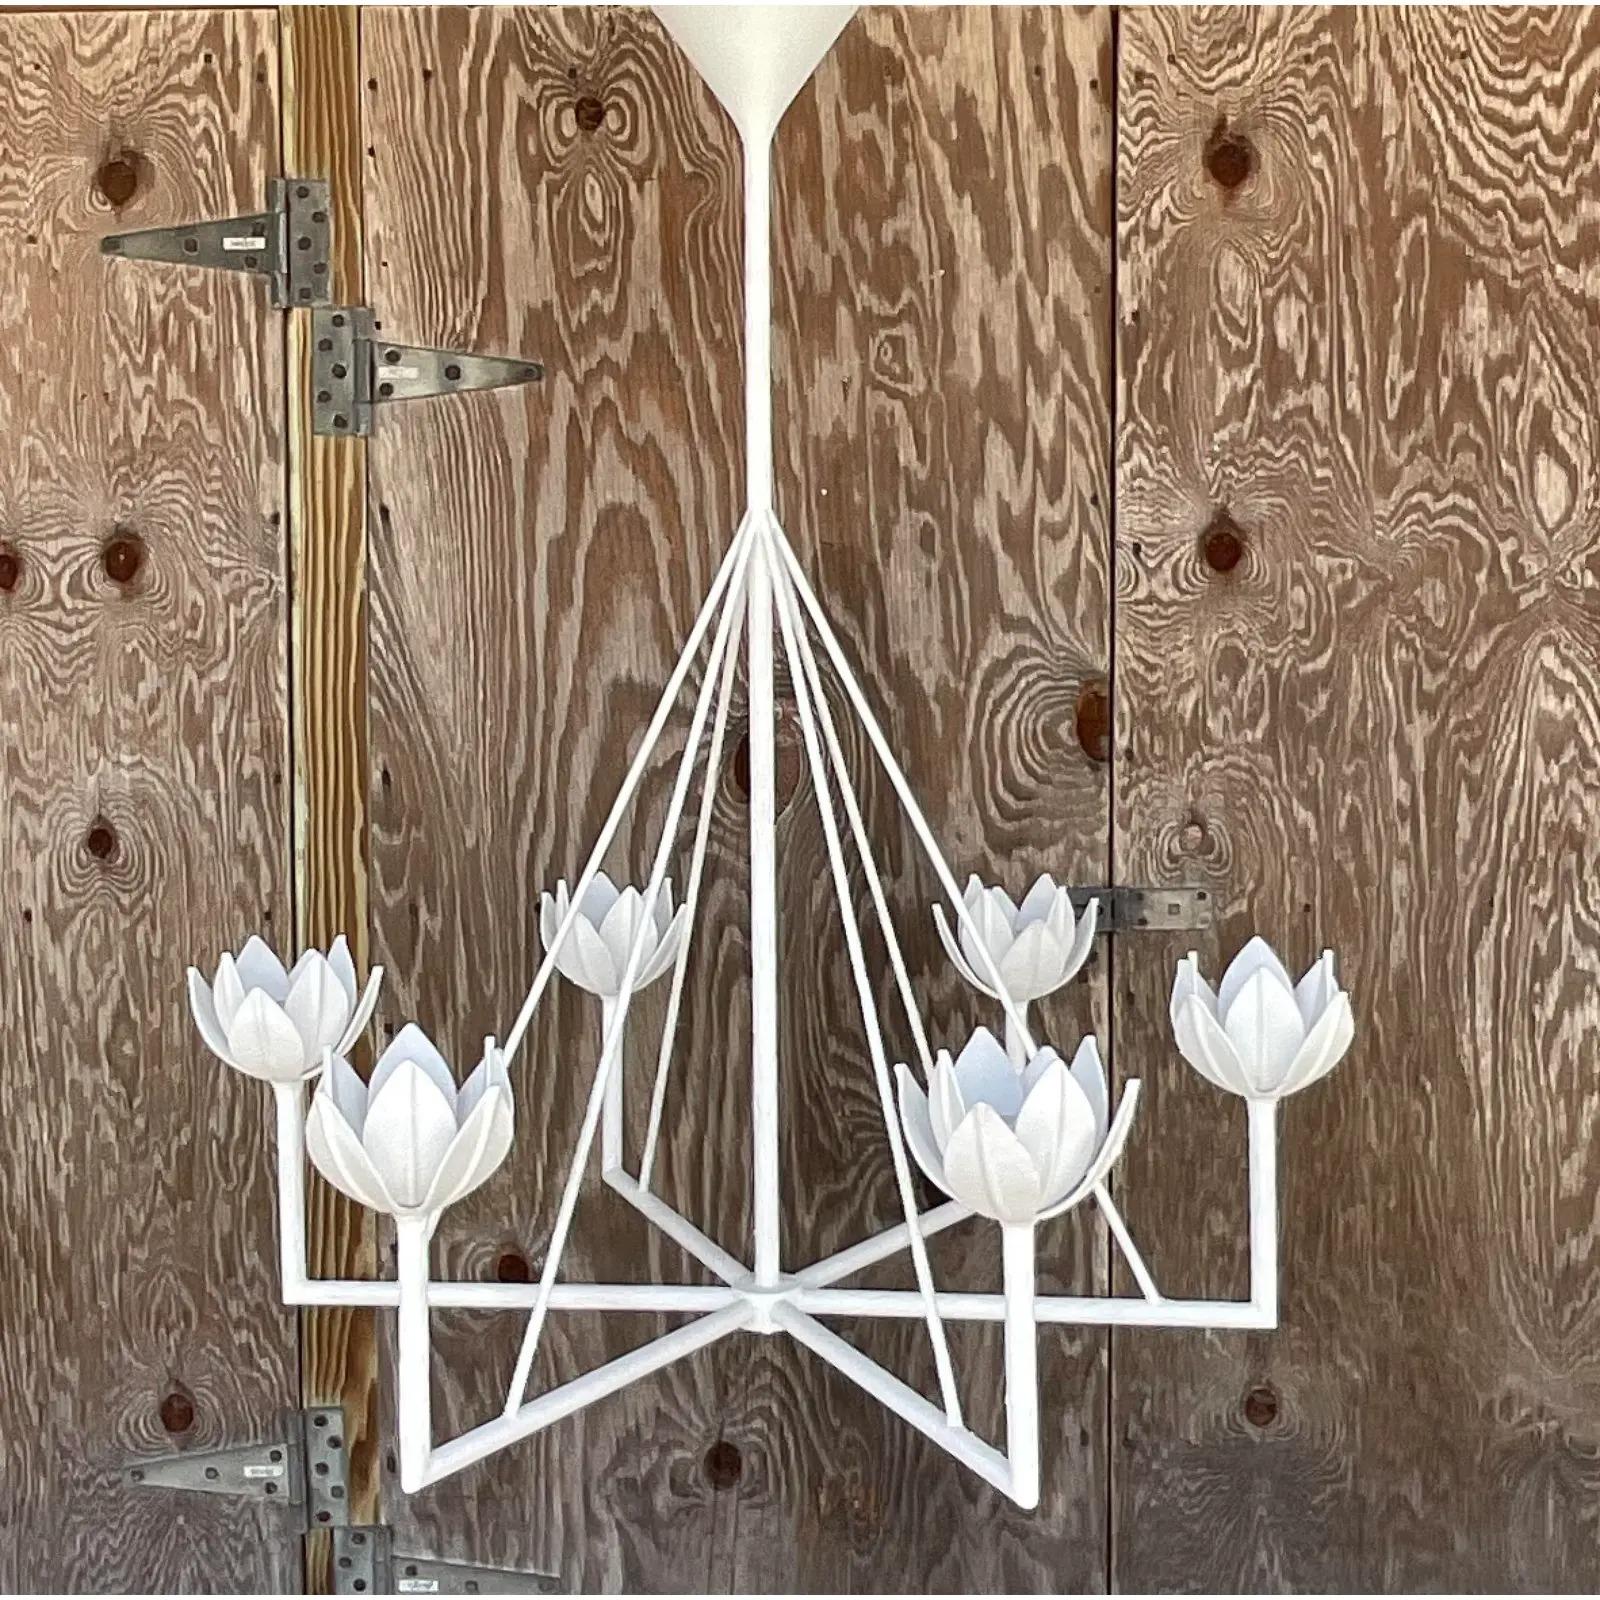 A fabulous vintage Coastal six arm chandelier. Made by the coveted Julie Neill for Circa Lighting. Beautiful plaster white finish with the famous tulip design. Acquired from a Palm Beach estate.